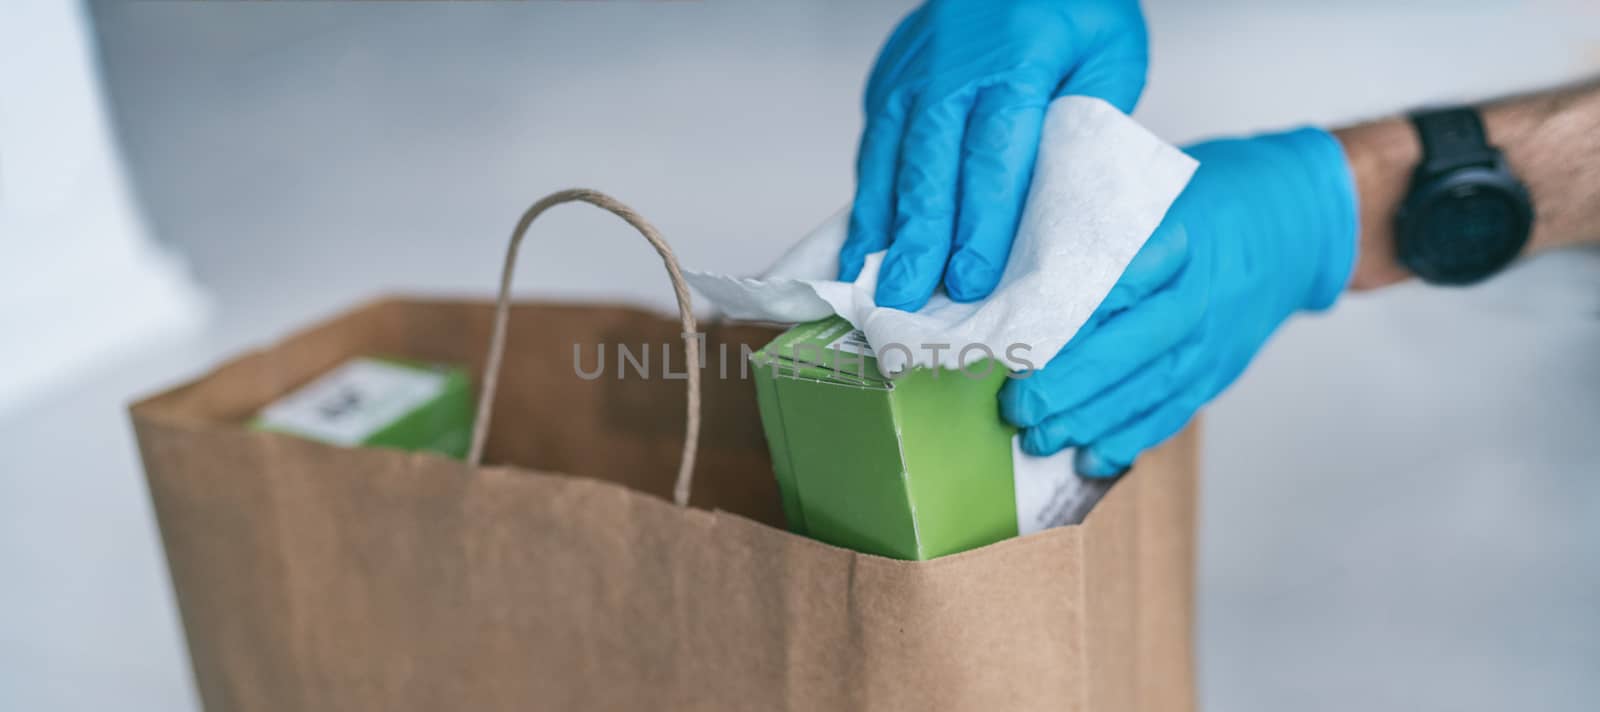 Coronavirus wiping down grocery packages after receiving home delivery wearing gloves, using disinfecting sanitizing wipes to wipe the surfaces clean. Cleaning of COVID-19 virus by Maridav